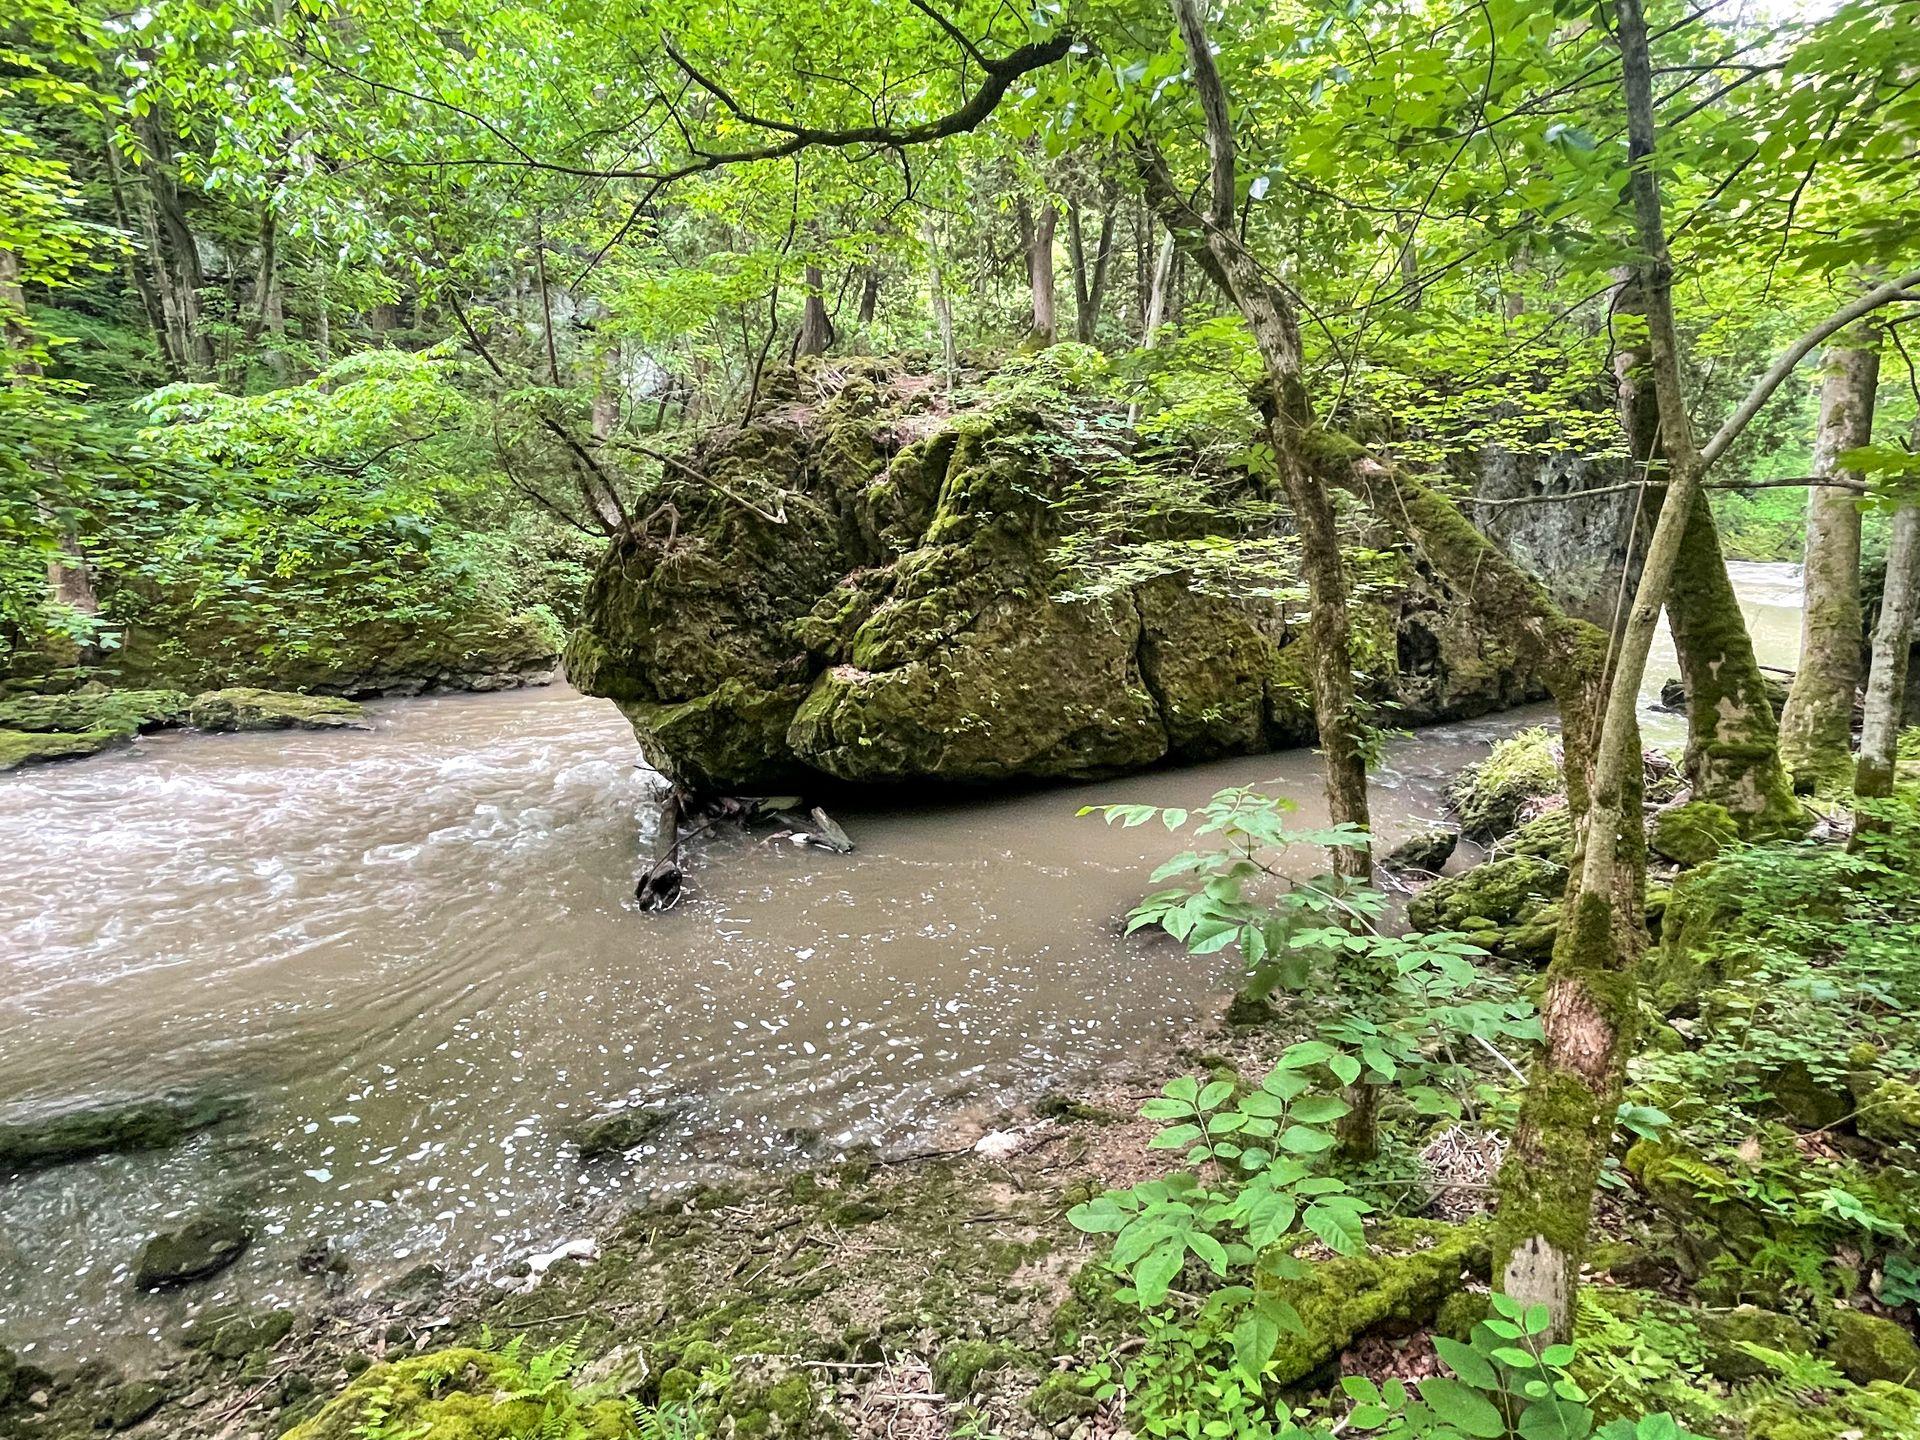 A large rock in the center of the stream in Cliton Gorge.